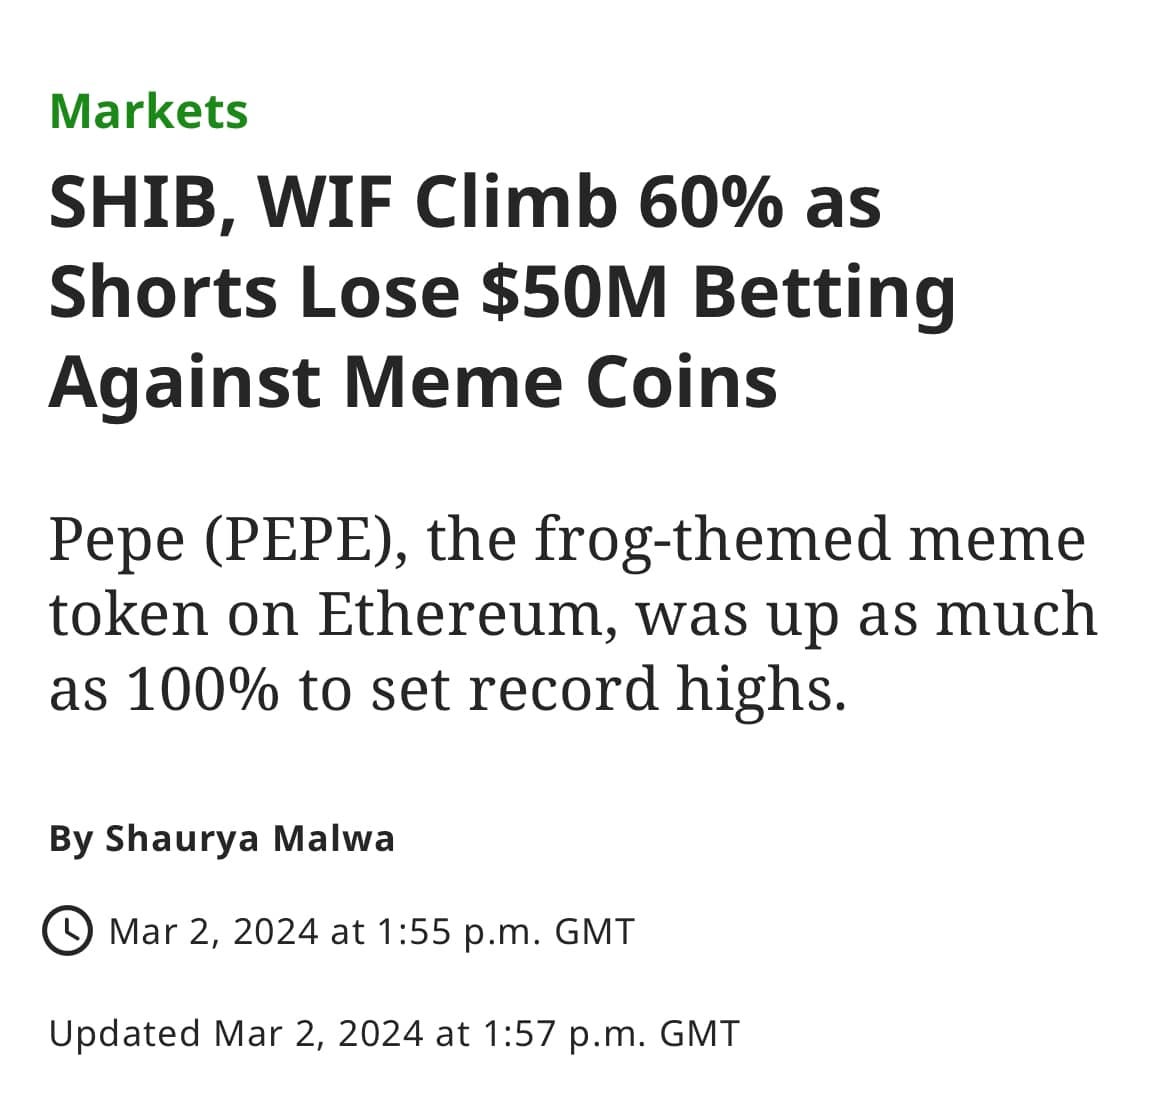 May be an image of text that says "Markets SHIB, WIF Climb 60% as Shorts Lose $50M Betting Against Meme Coins Pepe (PEPE), the frog-themed meme token on Ethereum, was up as much as 100% to set record highs. By Shaurya Malwa Mar 2, 2024 at 1:55 p.m. GMT Updated Mar 2, 2024 at 1:57 p.m. GMT"